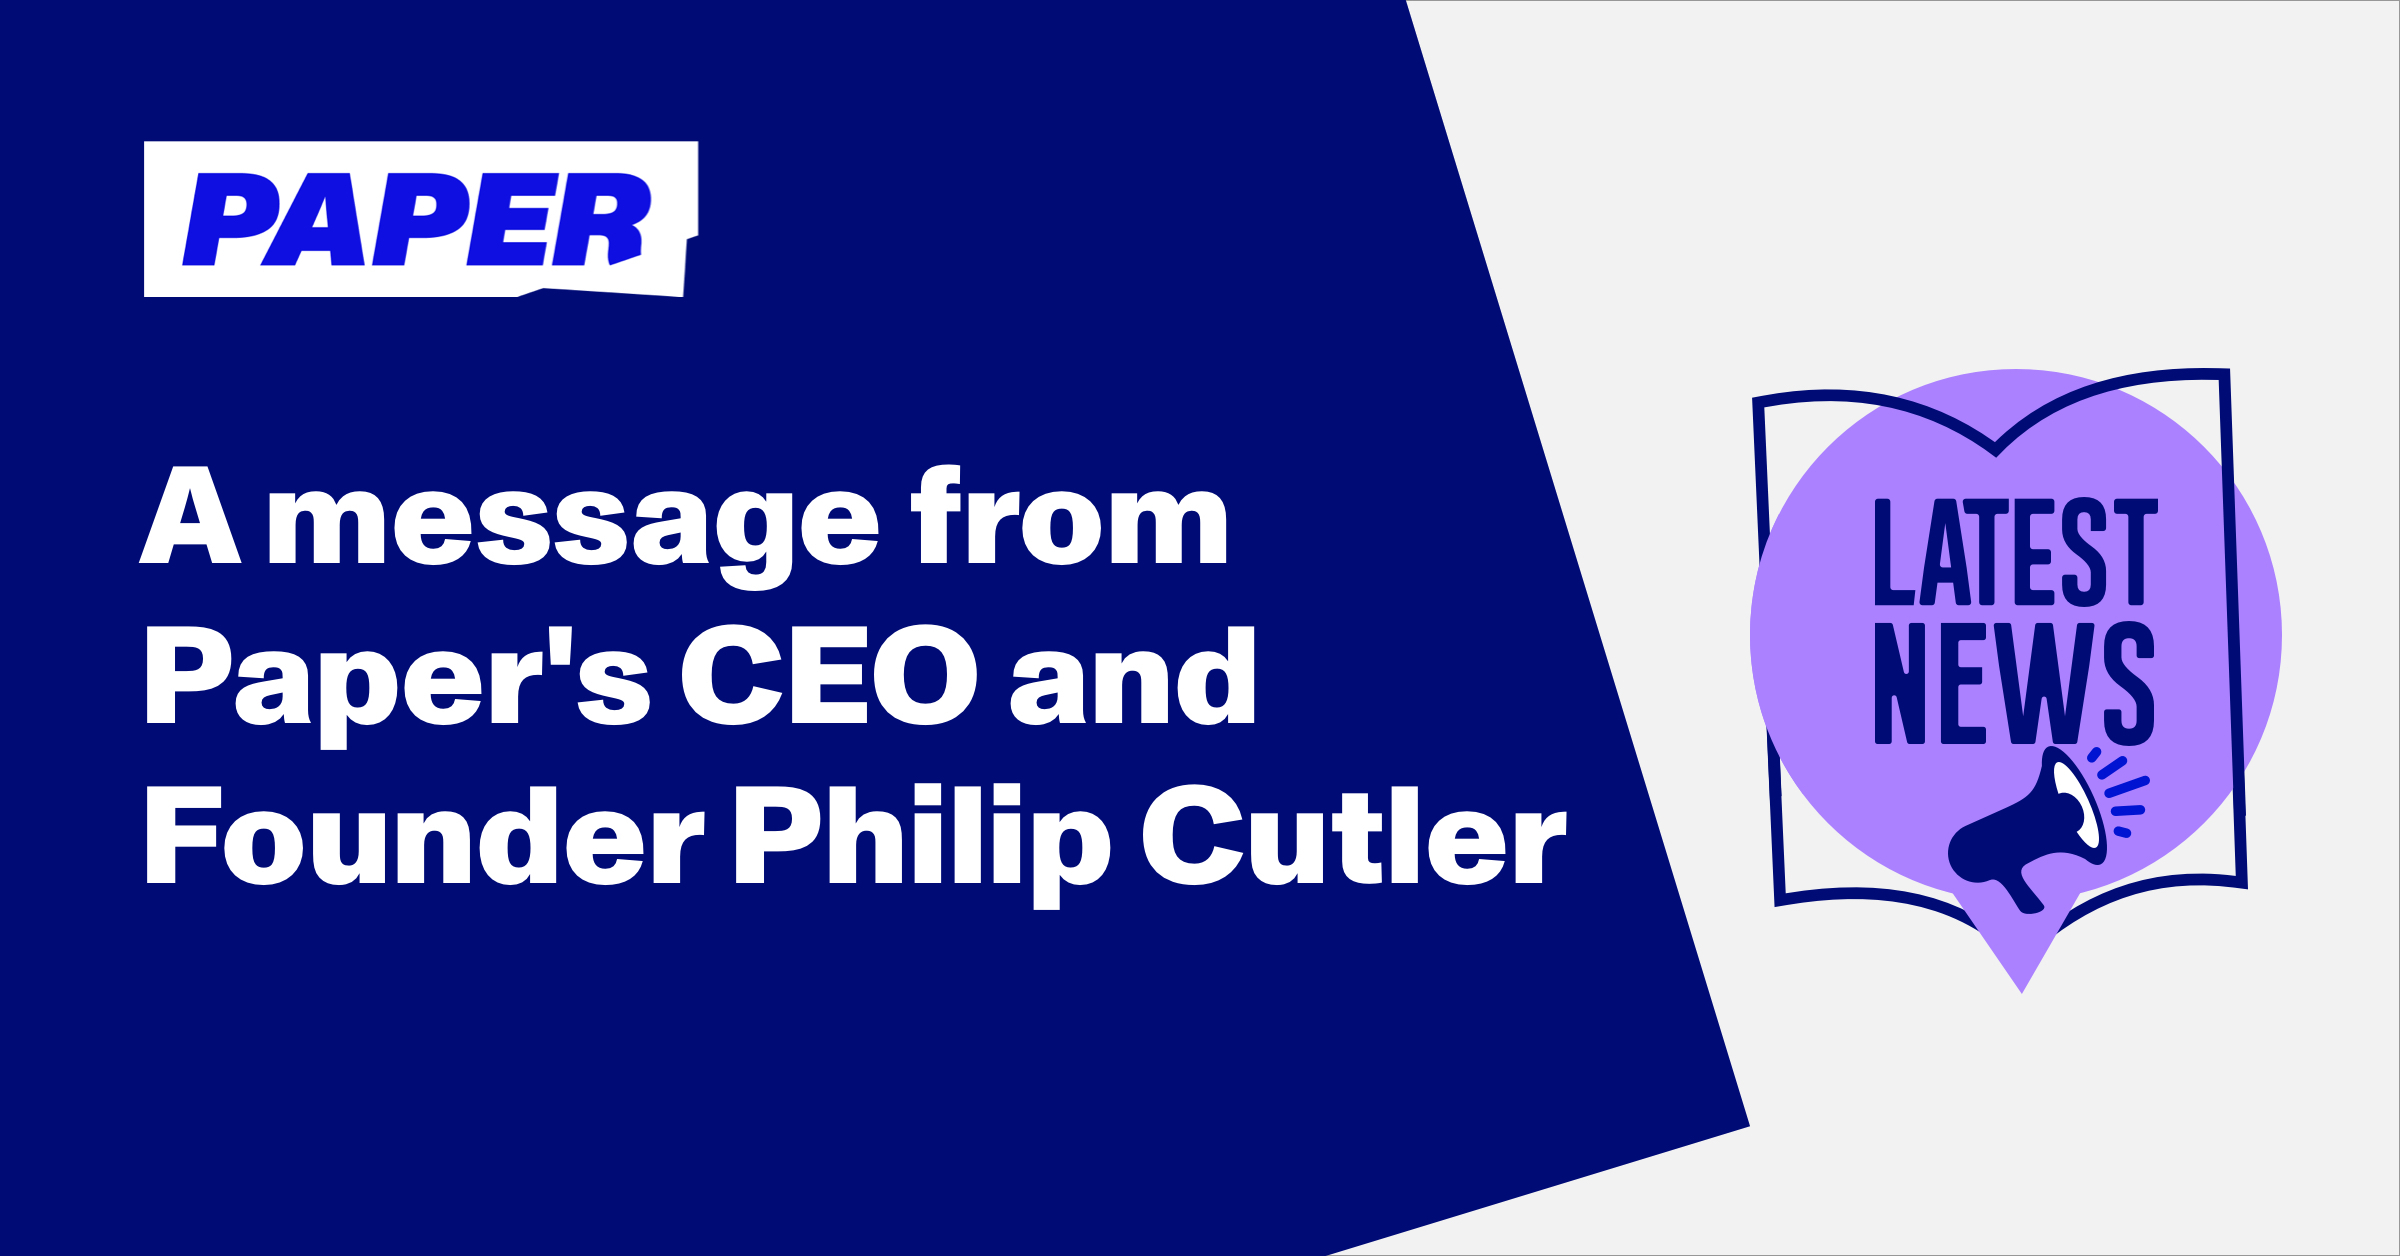 A message from Paper's CEO and Founder Philip Cutler